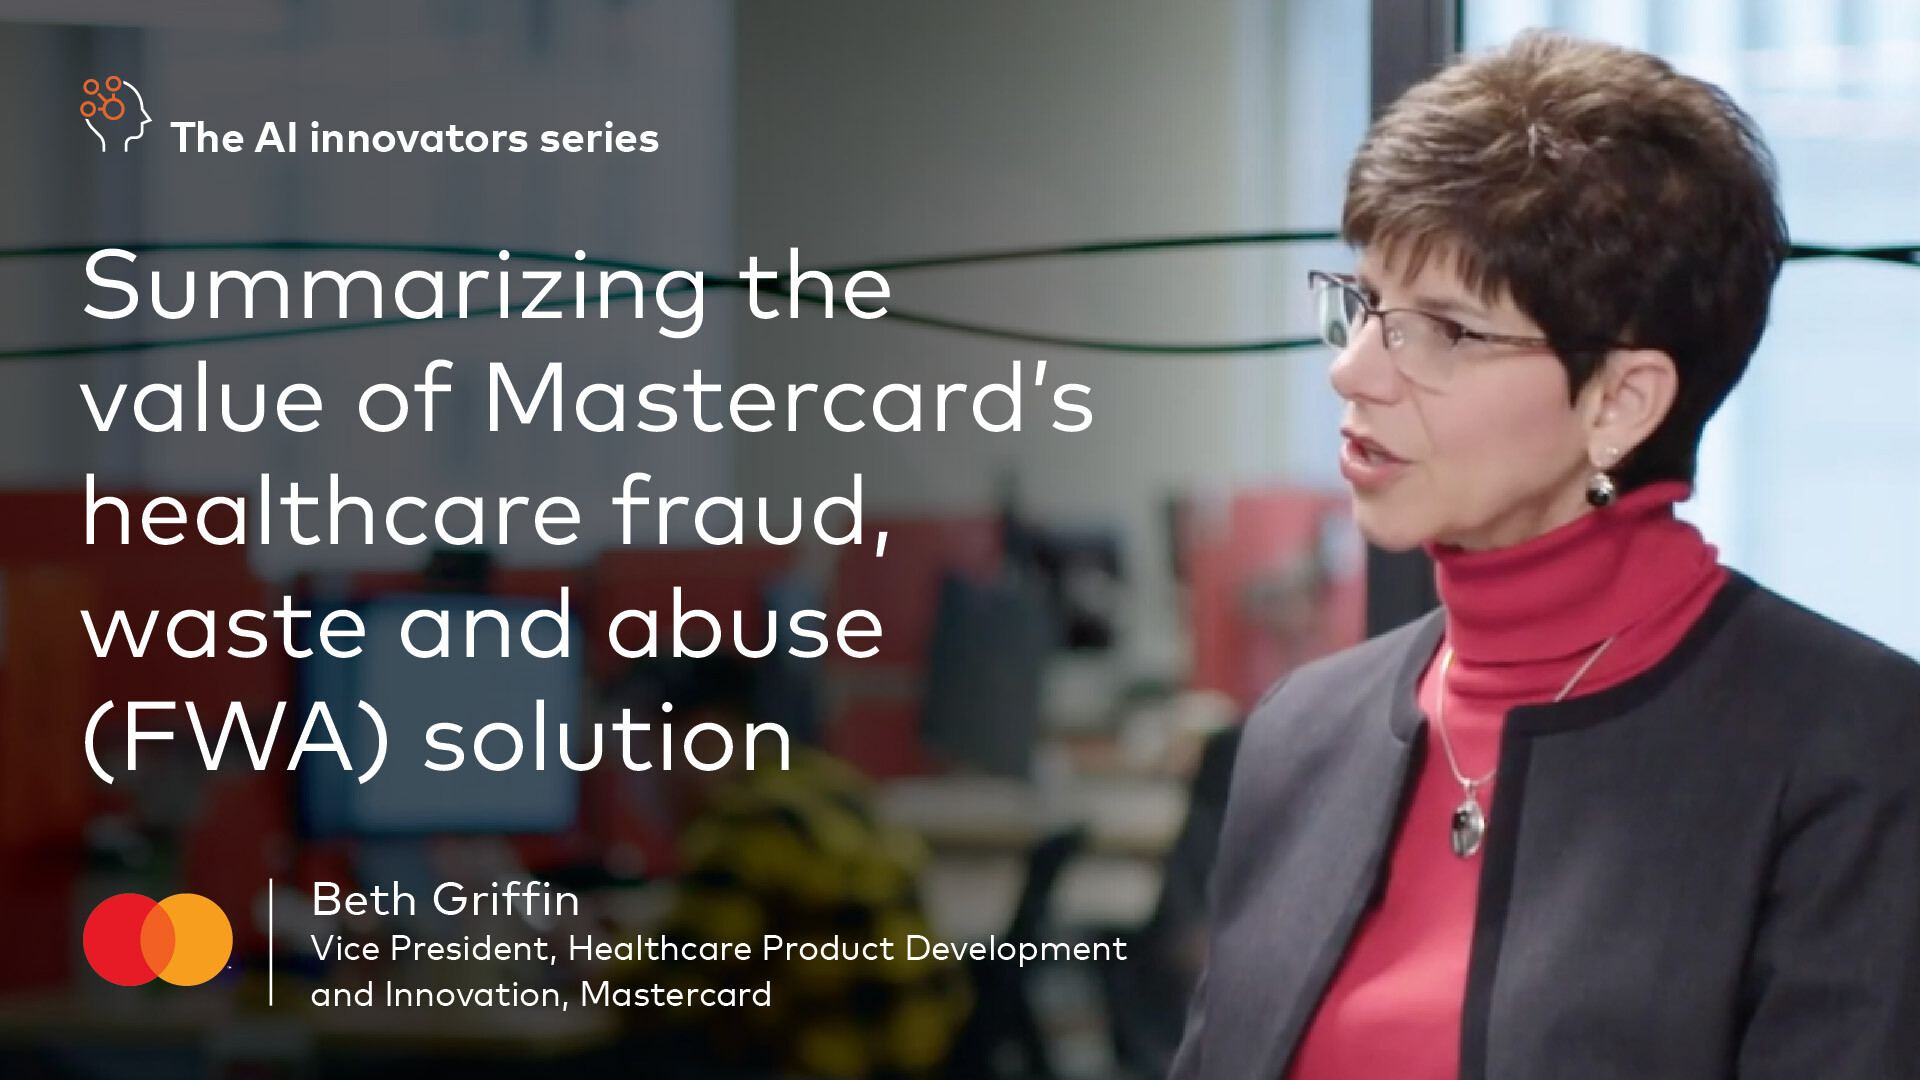 Summarizing the value of Mastercard’s healthcare fraud, waste and abuse (FWA) solution